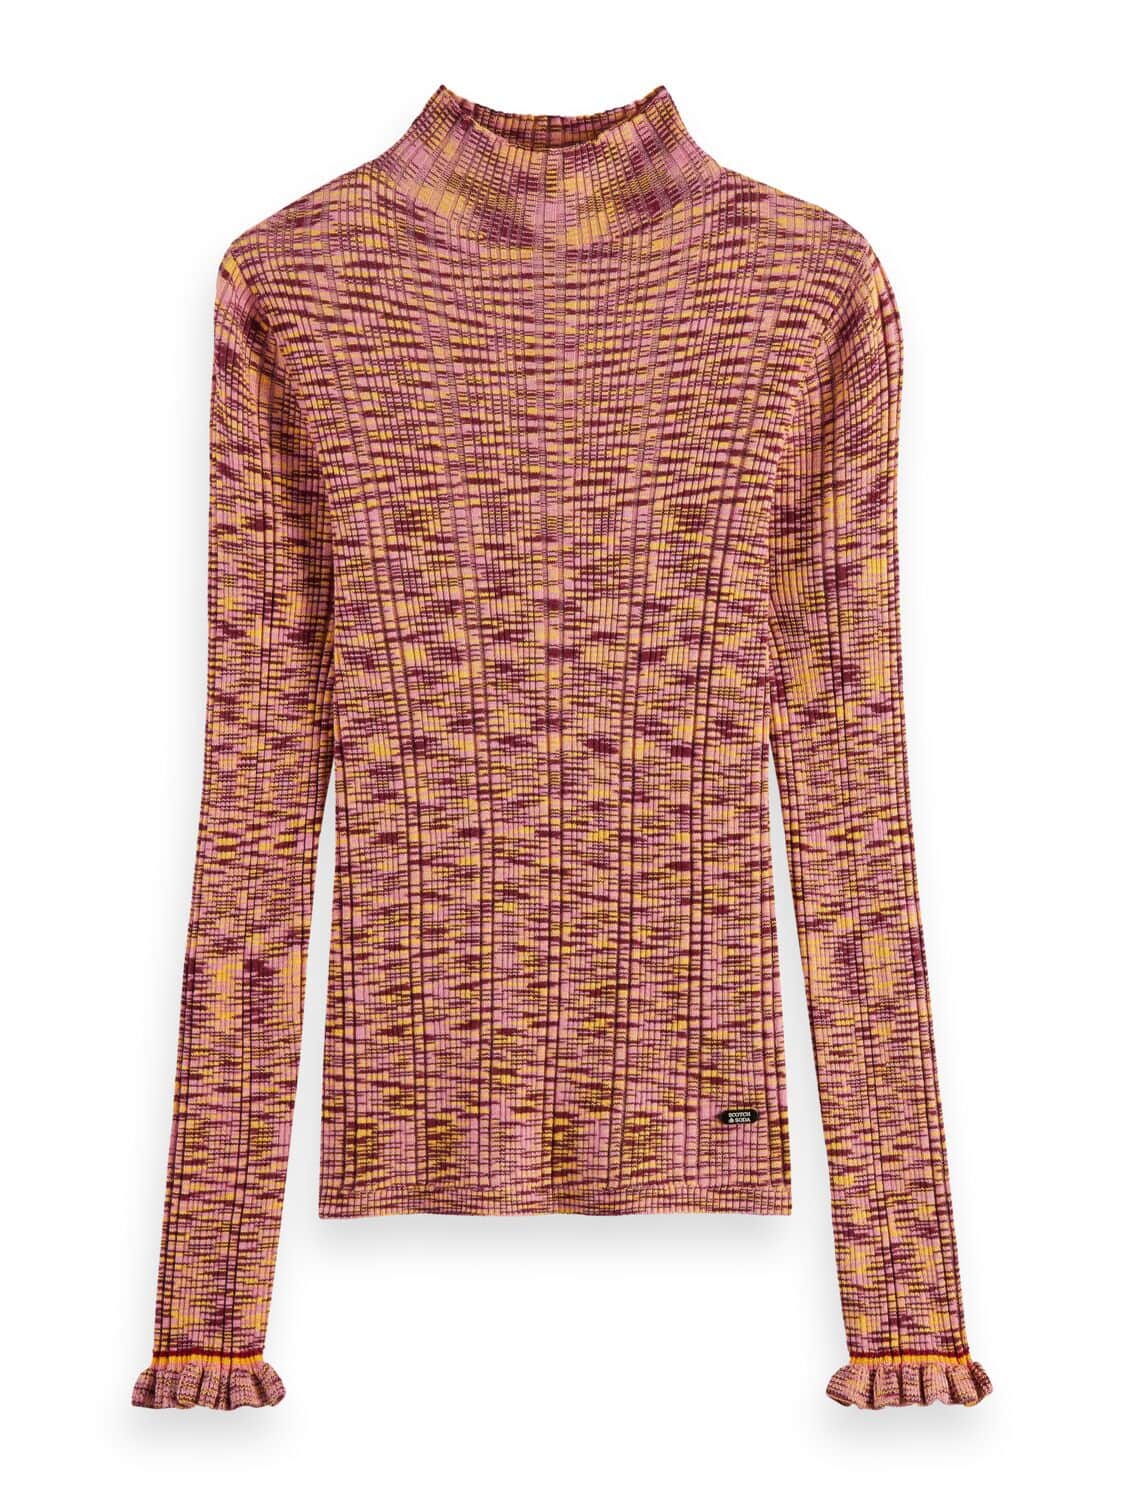 Petite Ribbed Mock-Neck Sweater, Created for Macy's